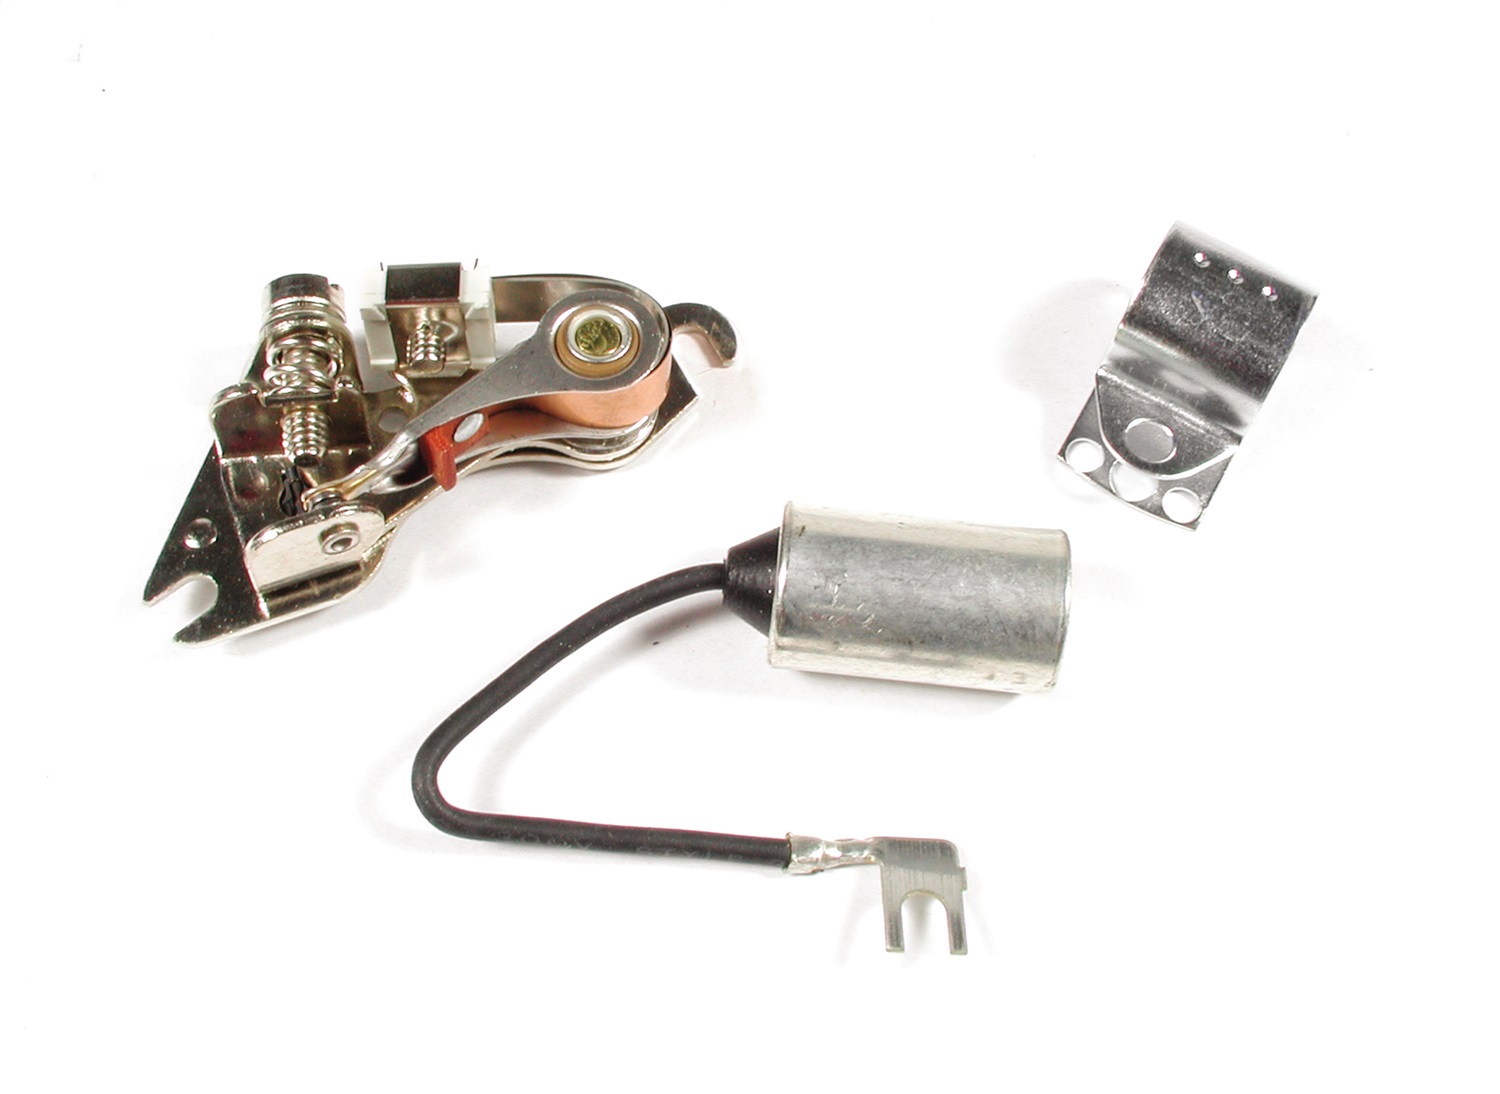 Ignition Contact Set and Condenser Kit